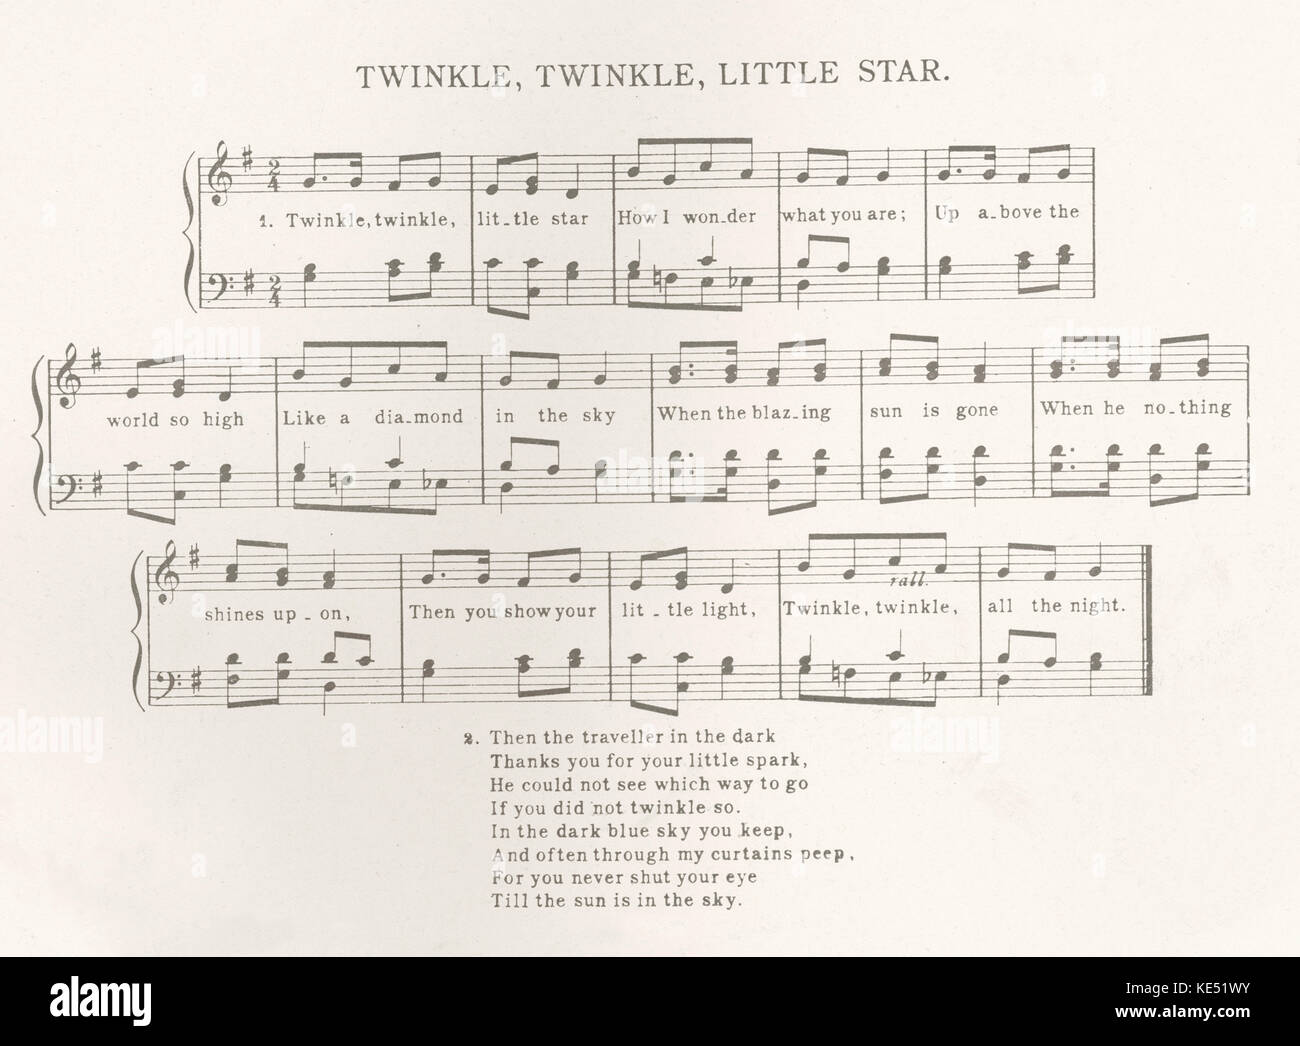 'Twinkle, Twinkle Little Star' - score and lyrics of the popular children 's song and nursery rhyme. Stock Photo